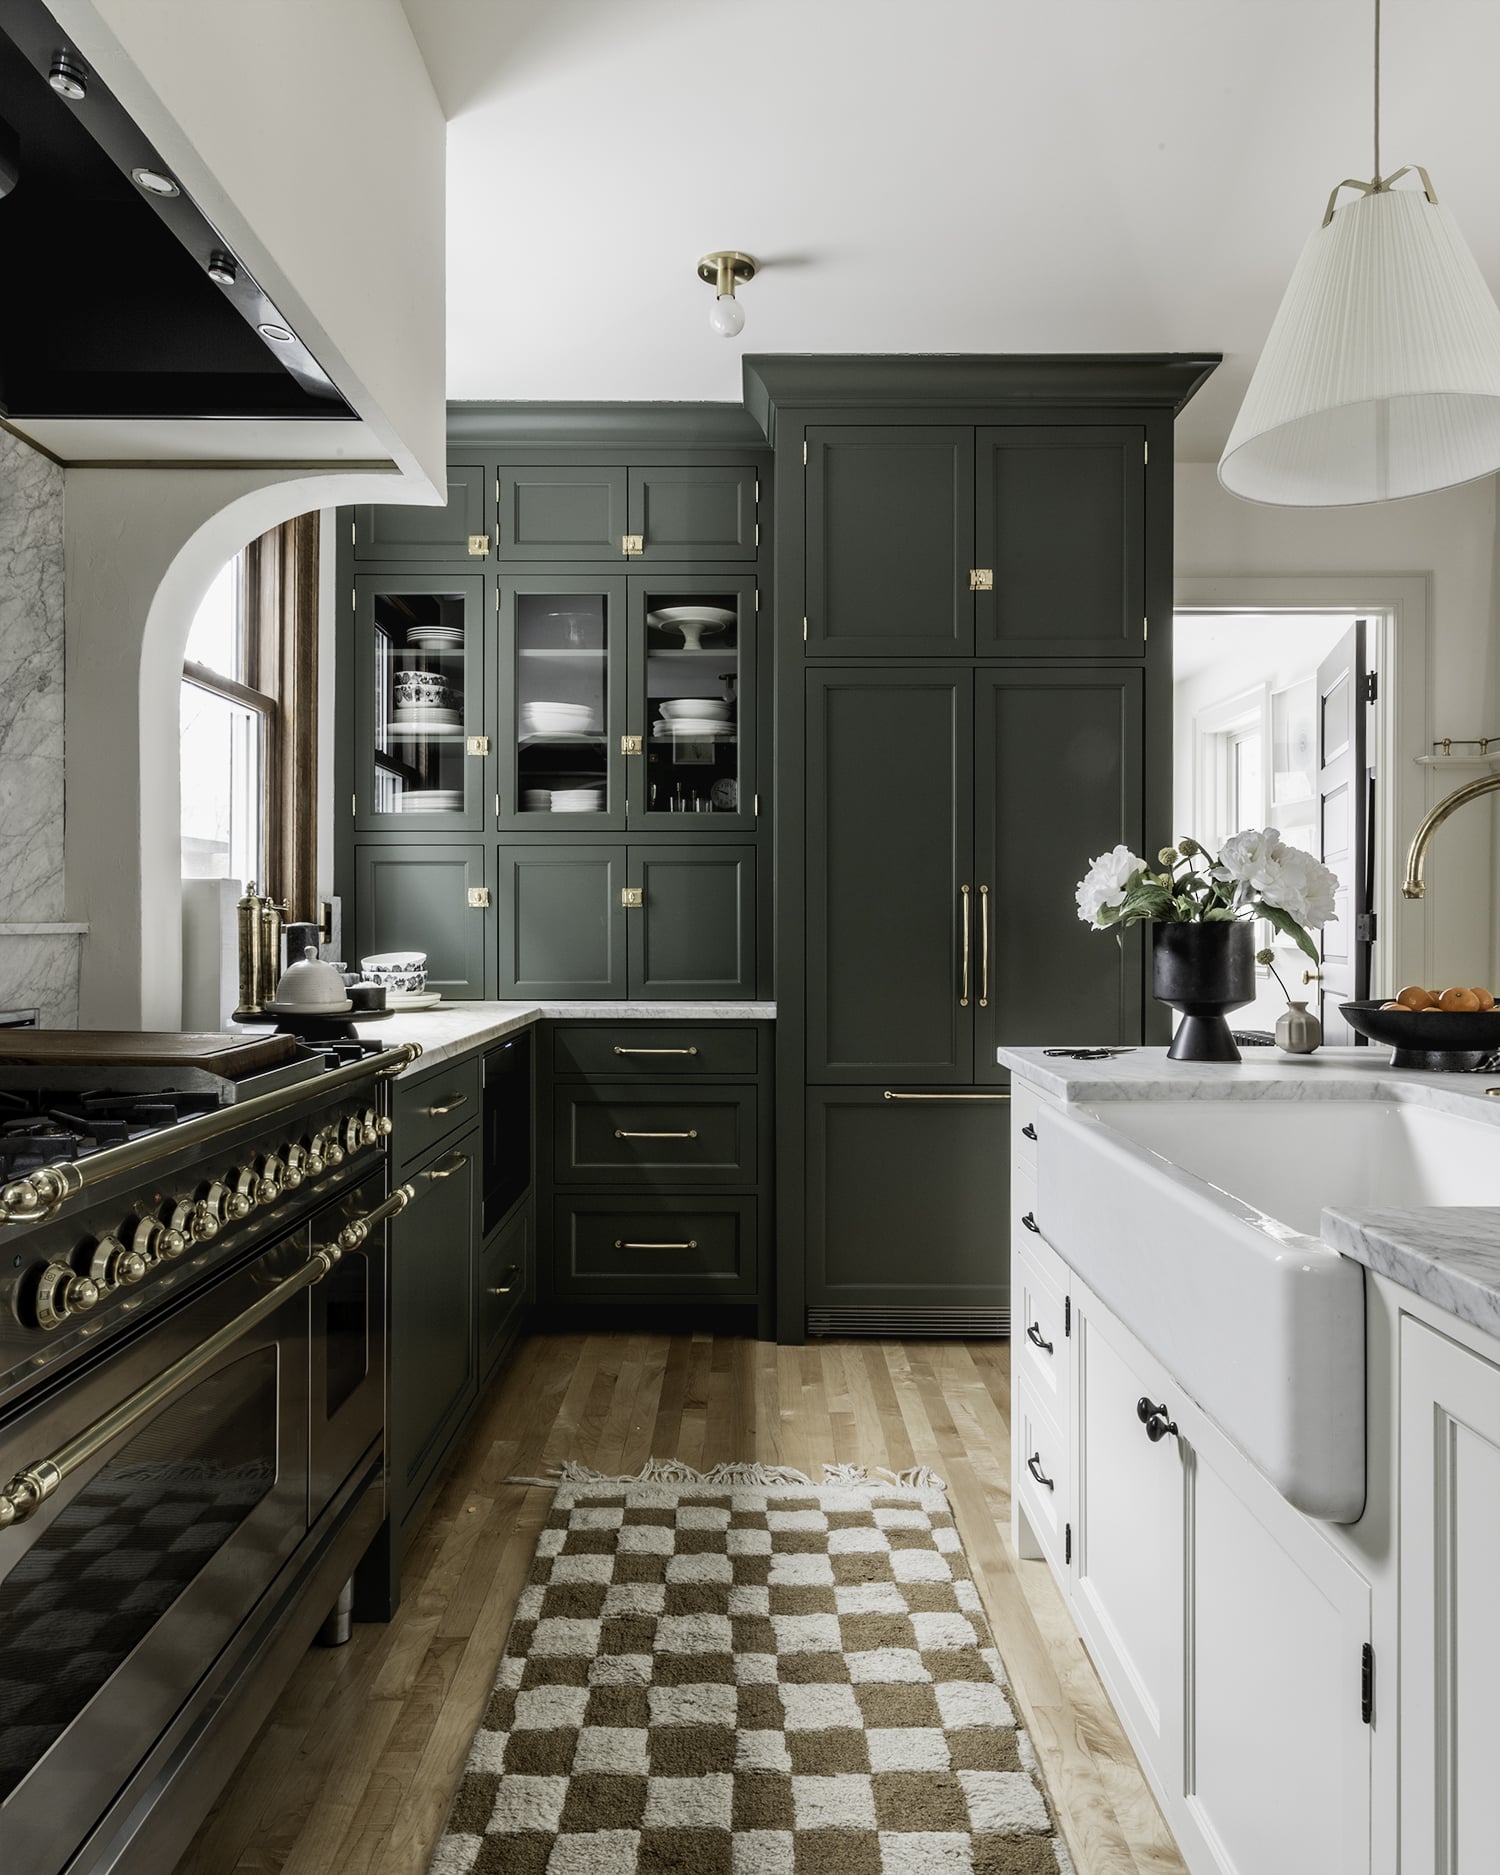 The Farmhouse Kitchen Reveal And All My Thoughts And Feelings About It -  Emily Henderson